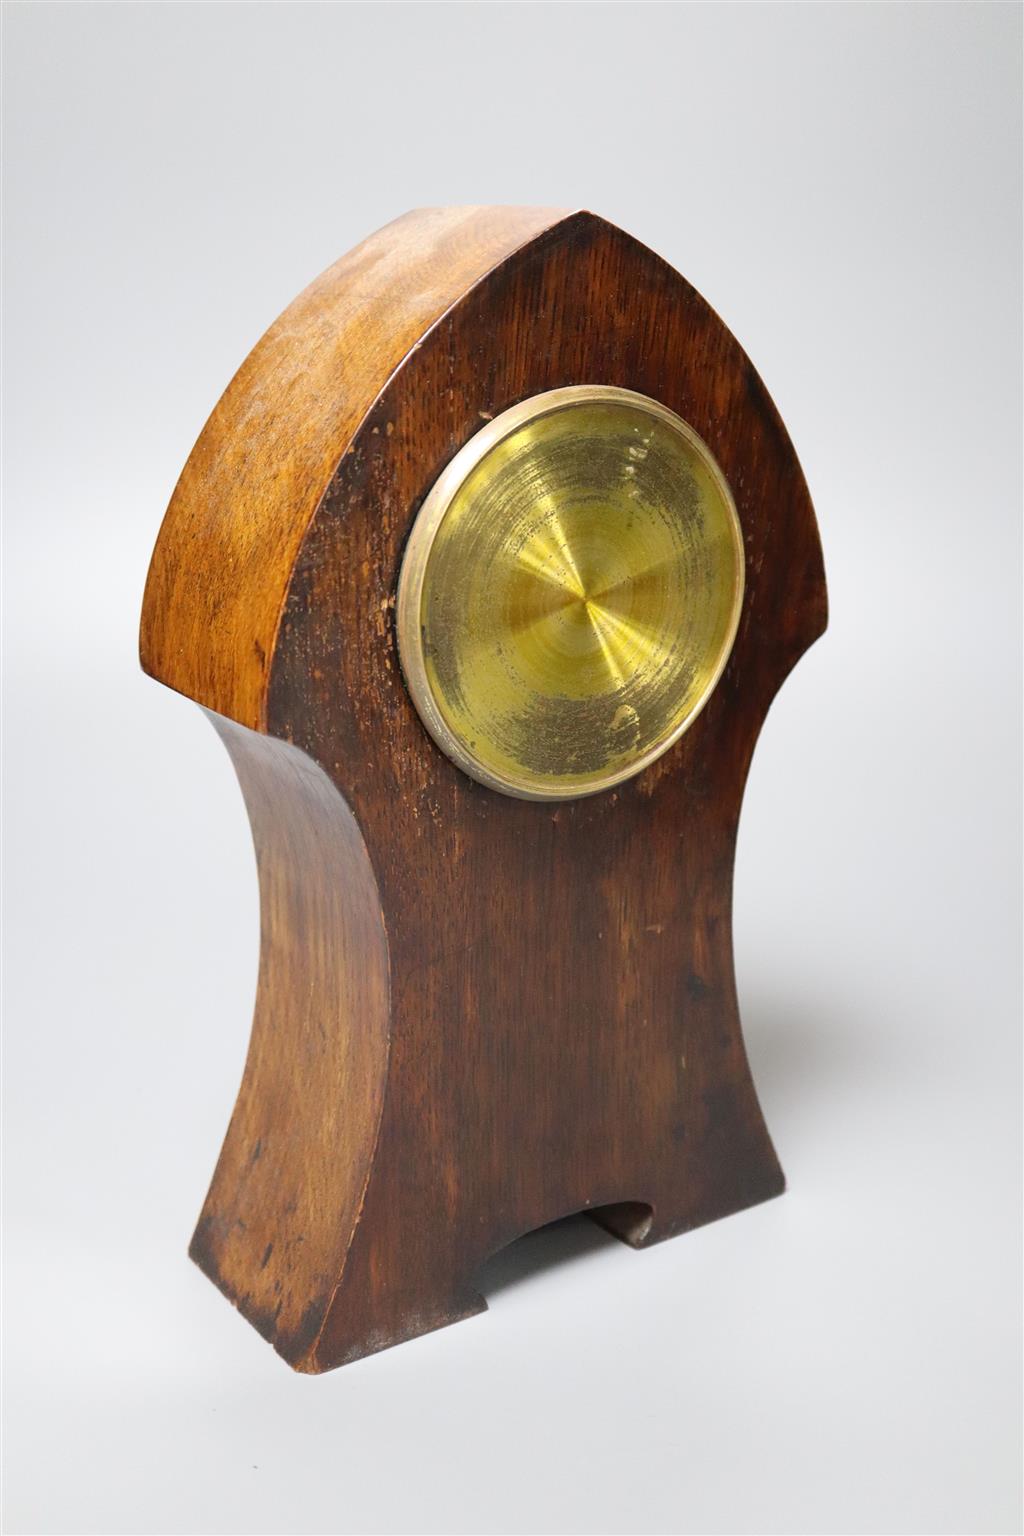 An Art Nouveau inlaid oak mantel clock, convex dial and French movement, case inlaid with copper strapwork, 28cm